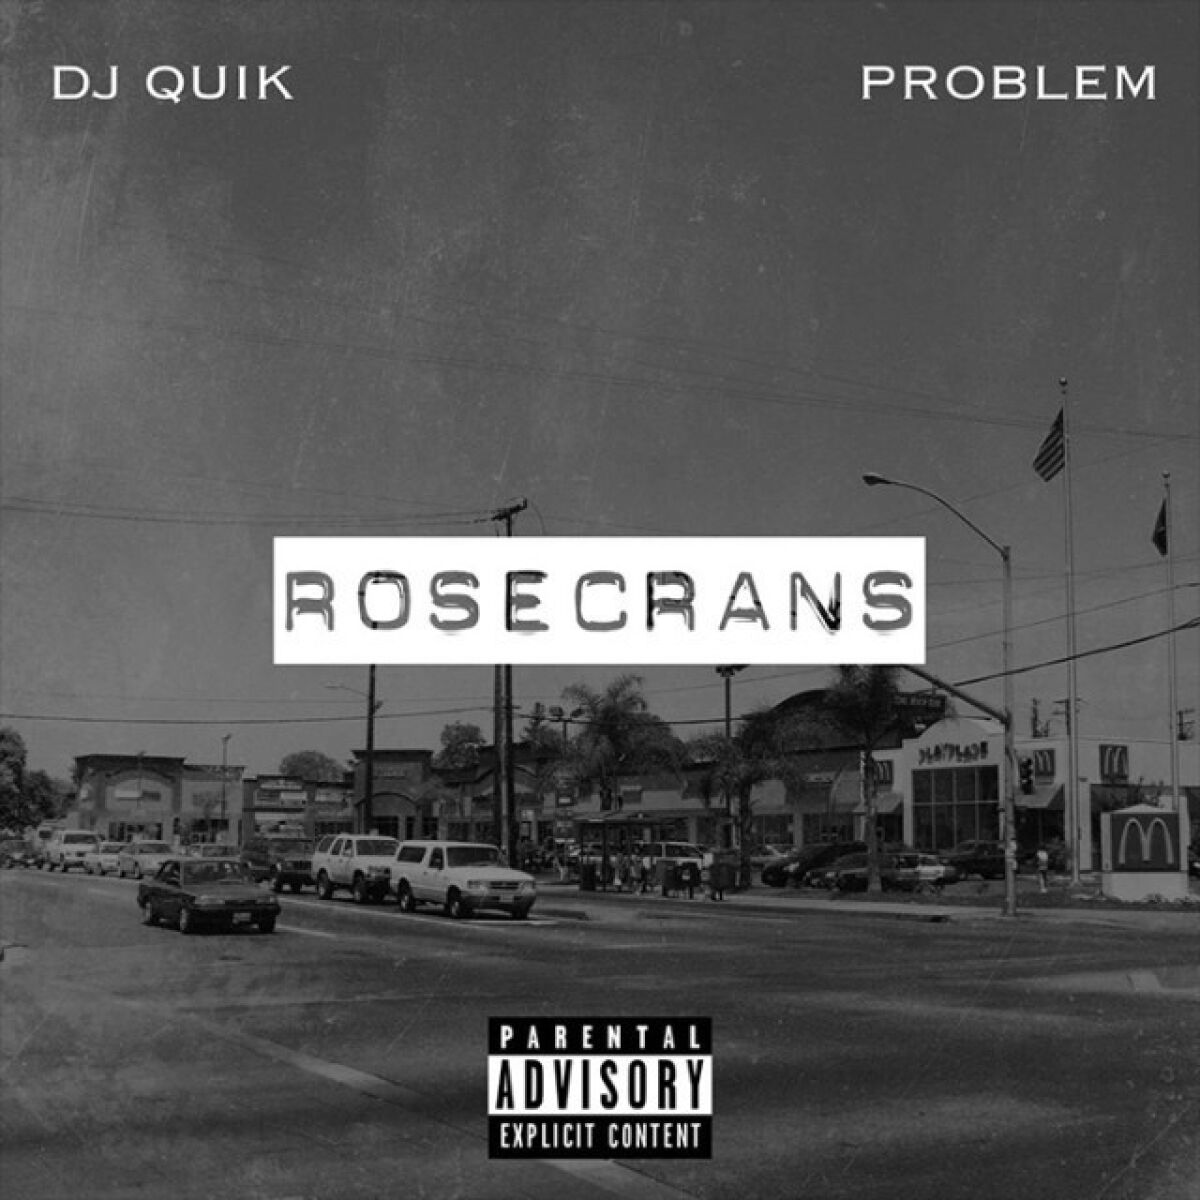 LISTEN AND EXPLORE: Rap's Main Street — the music of Rosecrans Avenue. Click the album cover (above) of "Rosecrans" (feat. The Game & Candace Boyd) by DJ Quik & Problem.